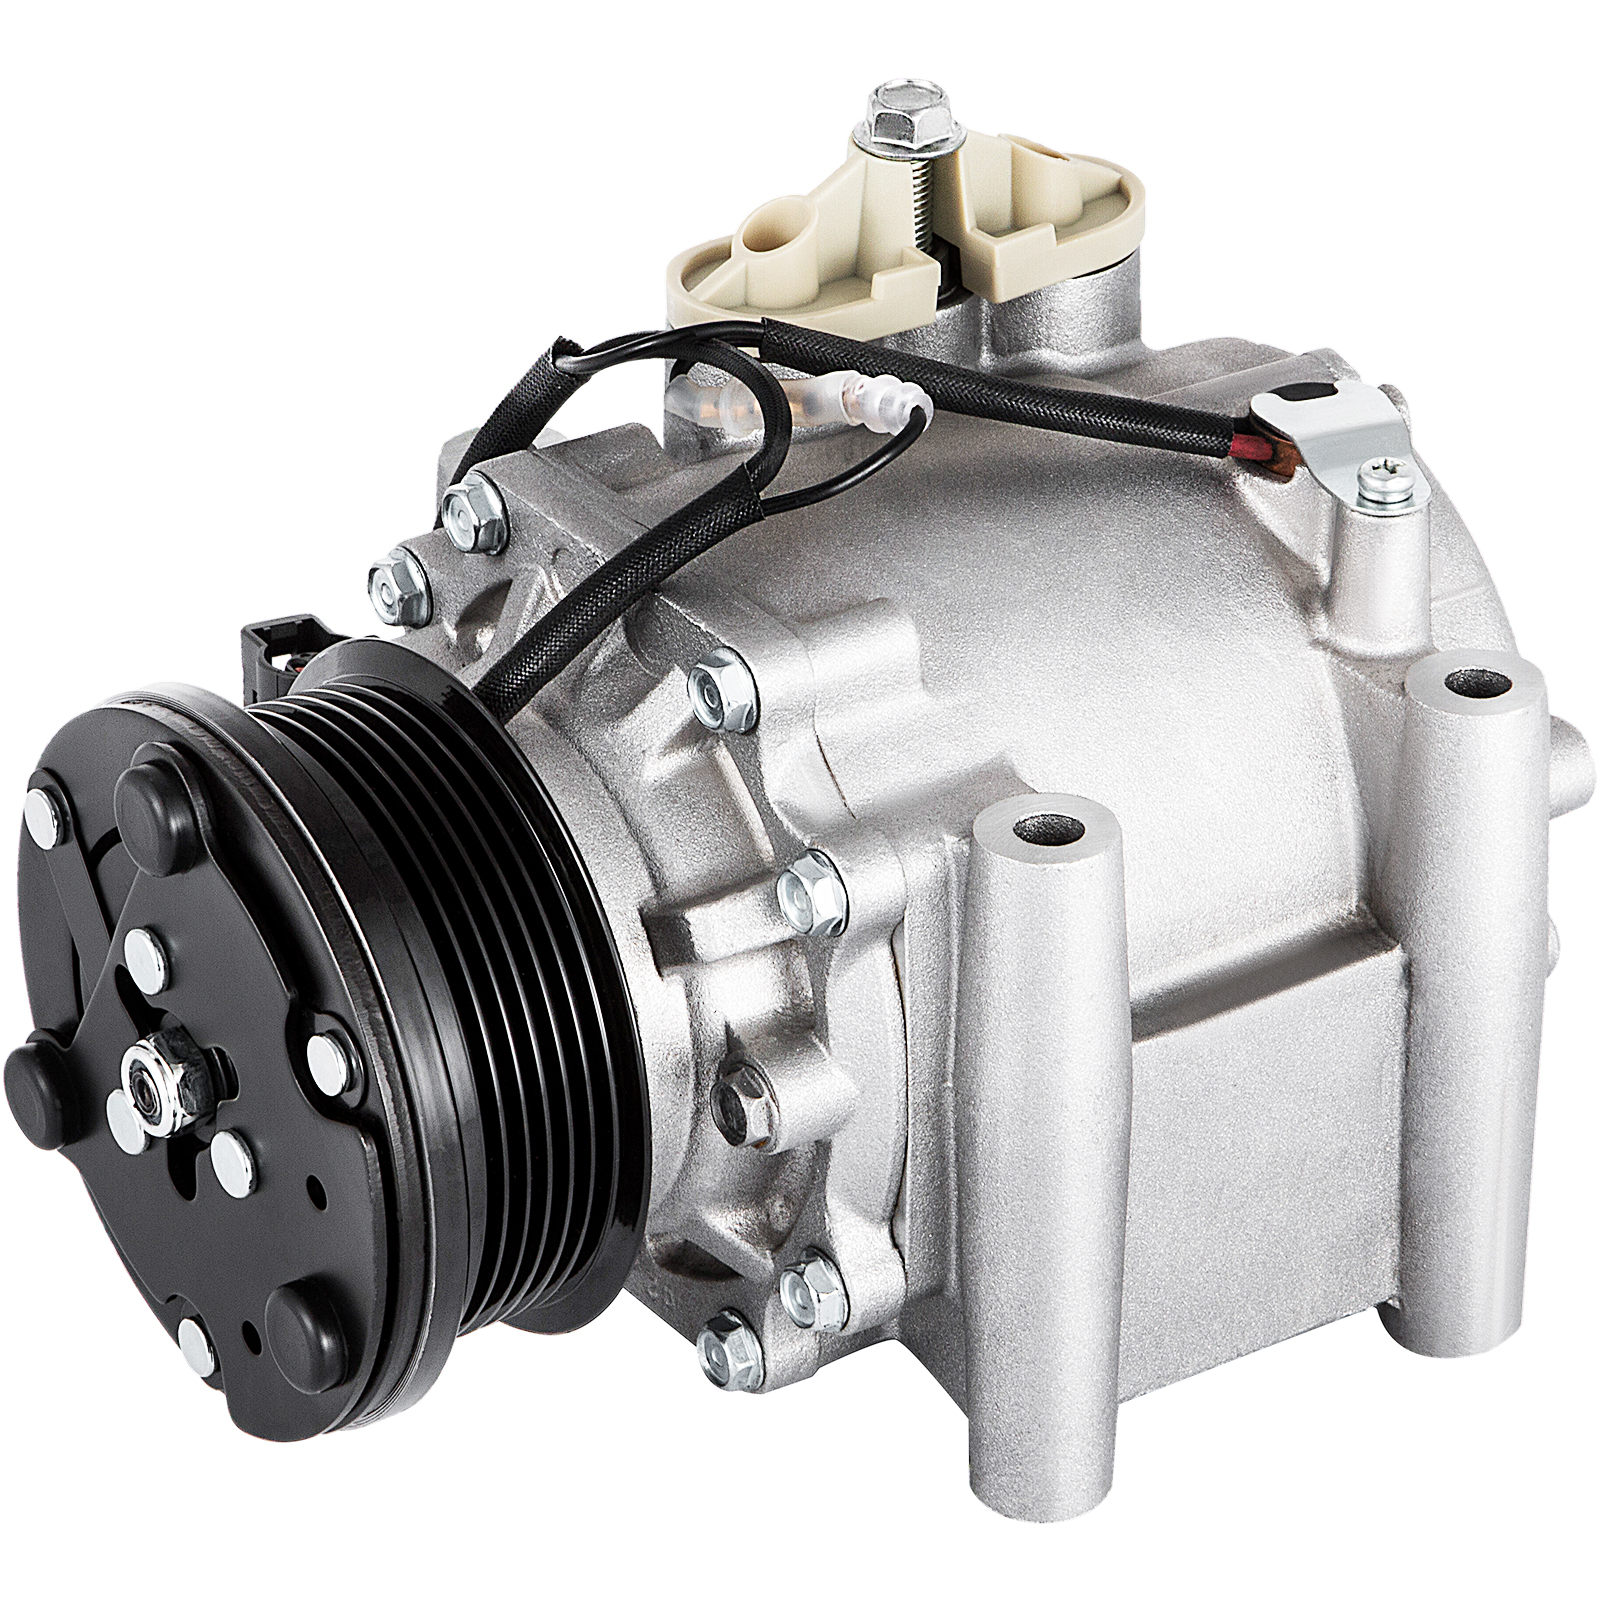 A-Premium AC Compressor with Clutch Compatible with Jaguar S-Type 2000-2008 X-Type 2002-2008 Lincoln LS 2000-2005 